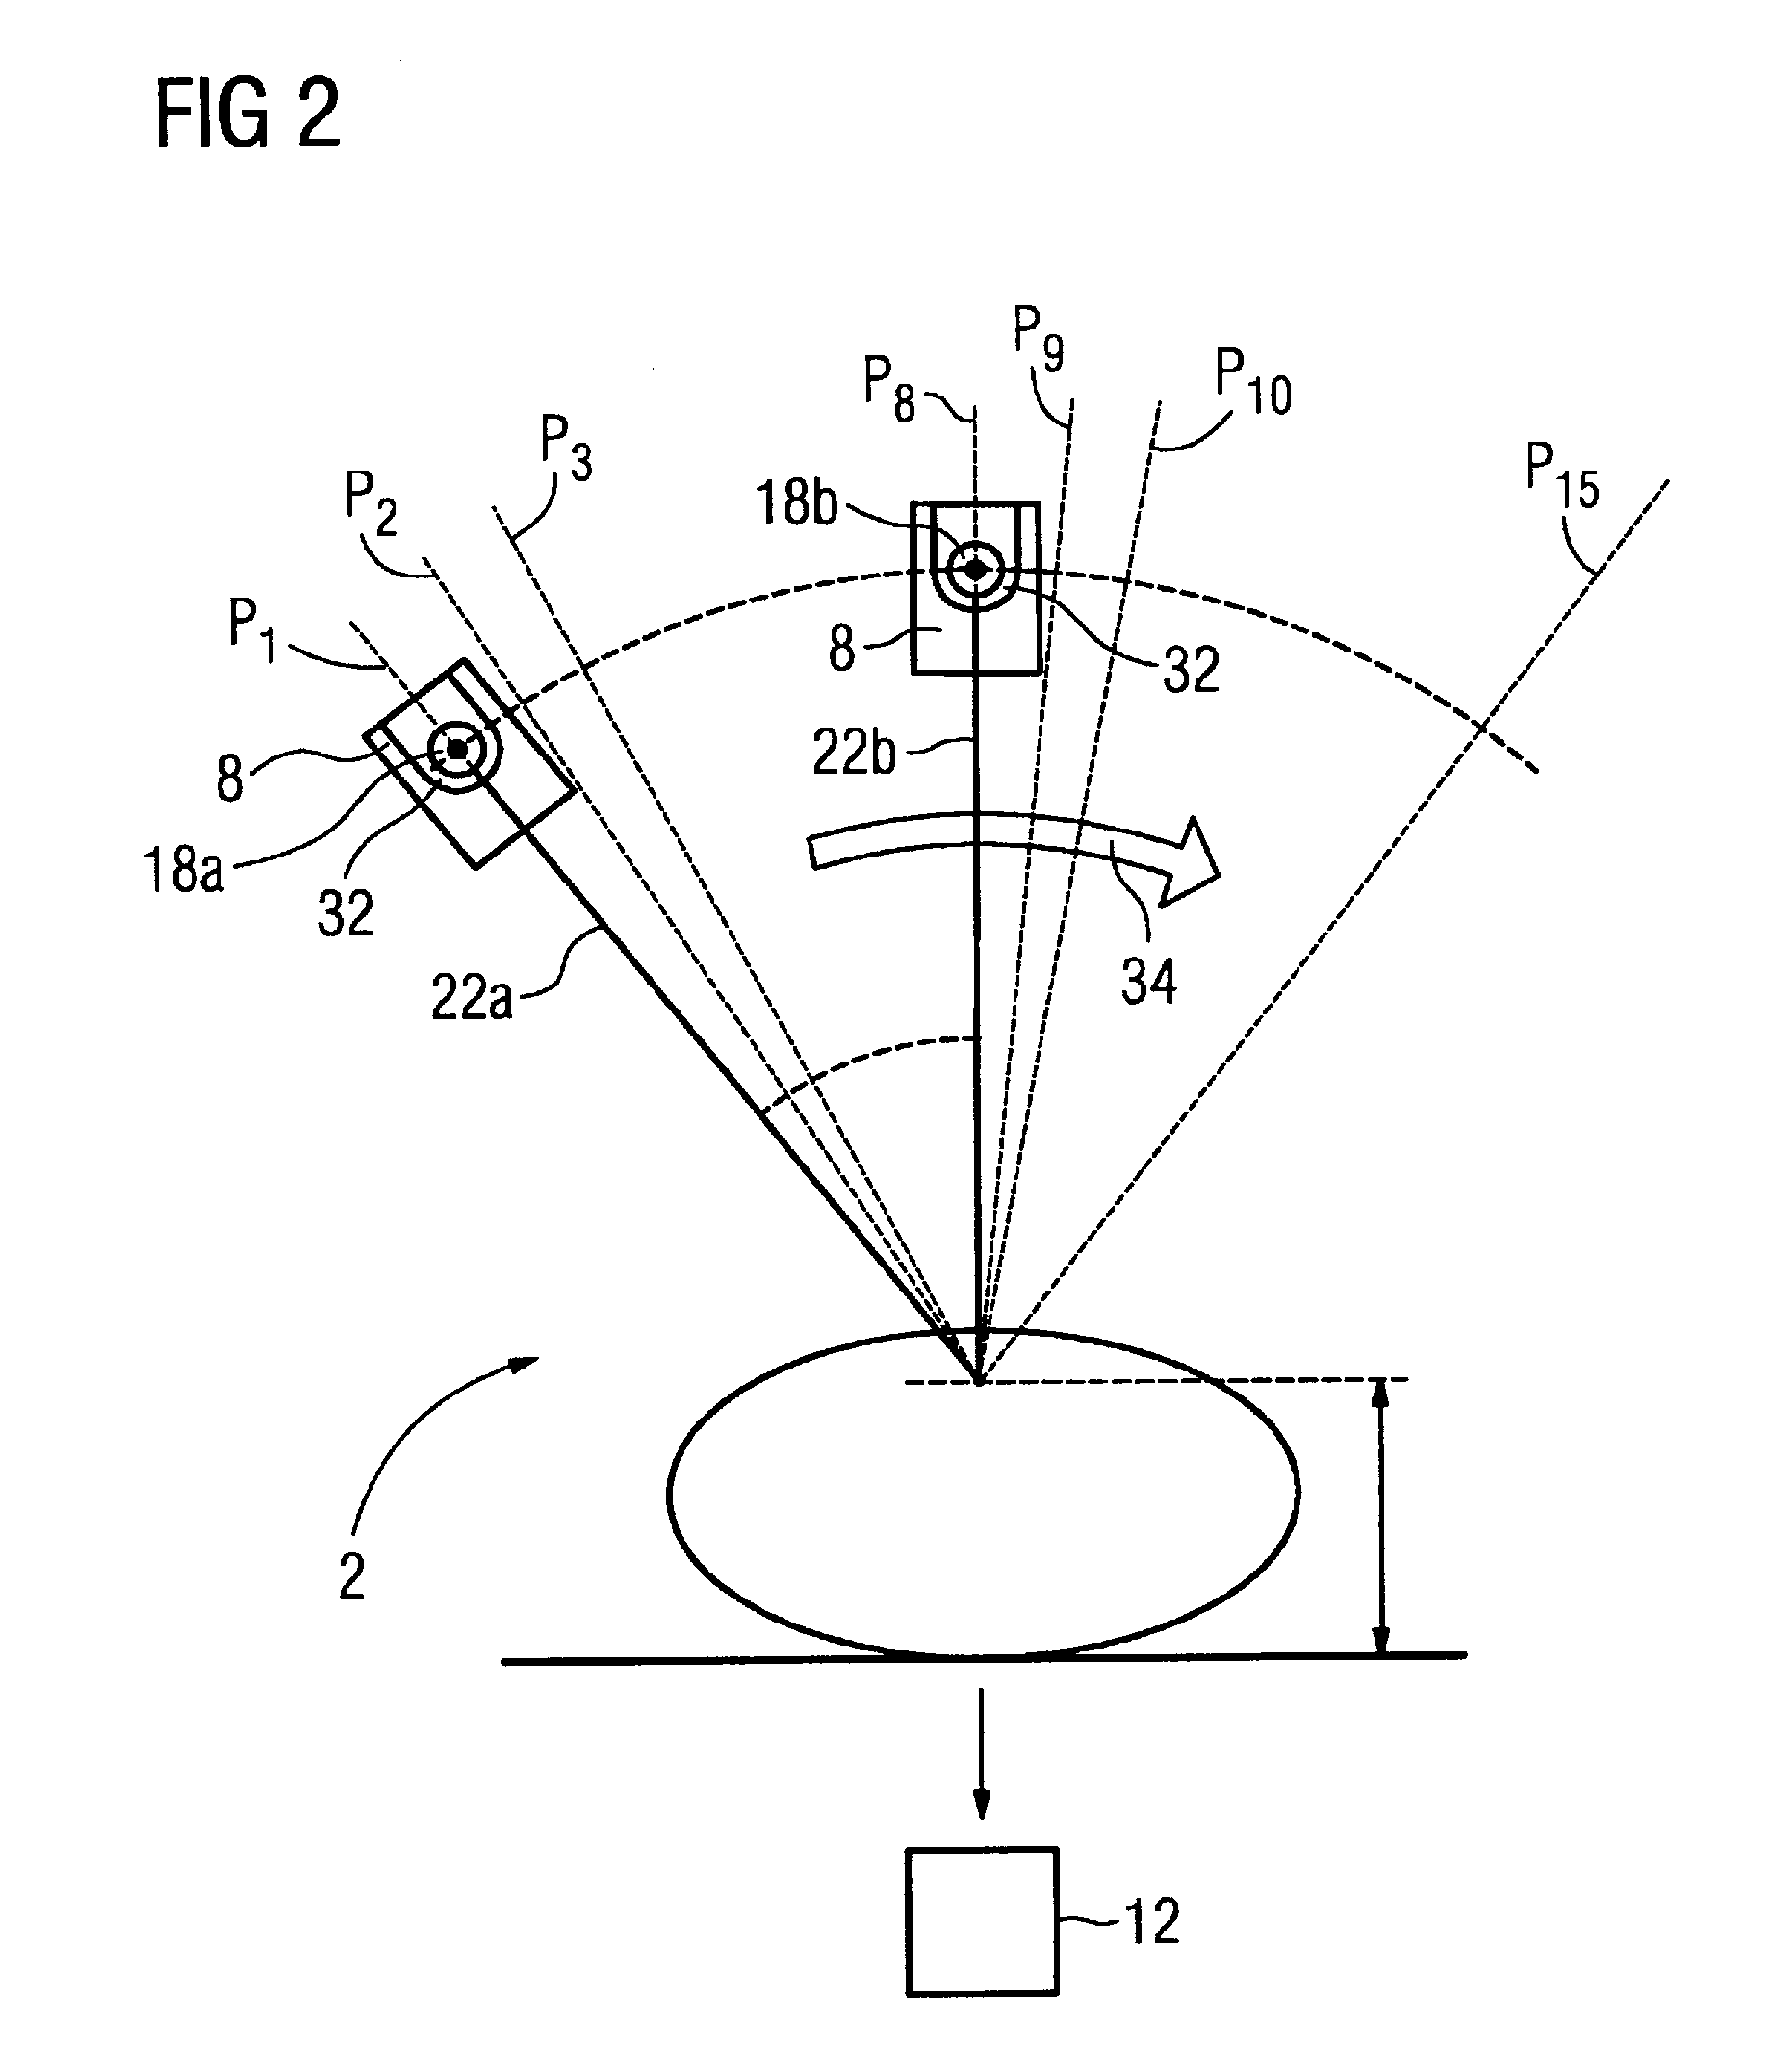 X-ray system and method for tomosynthetic scanning